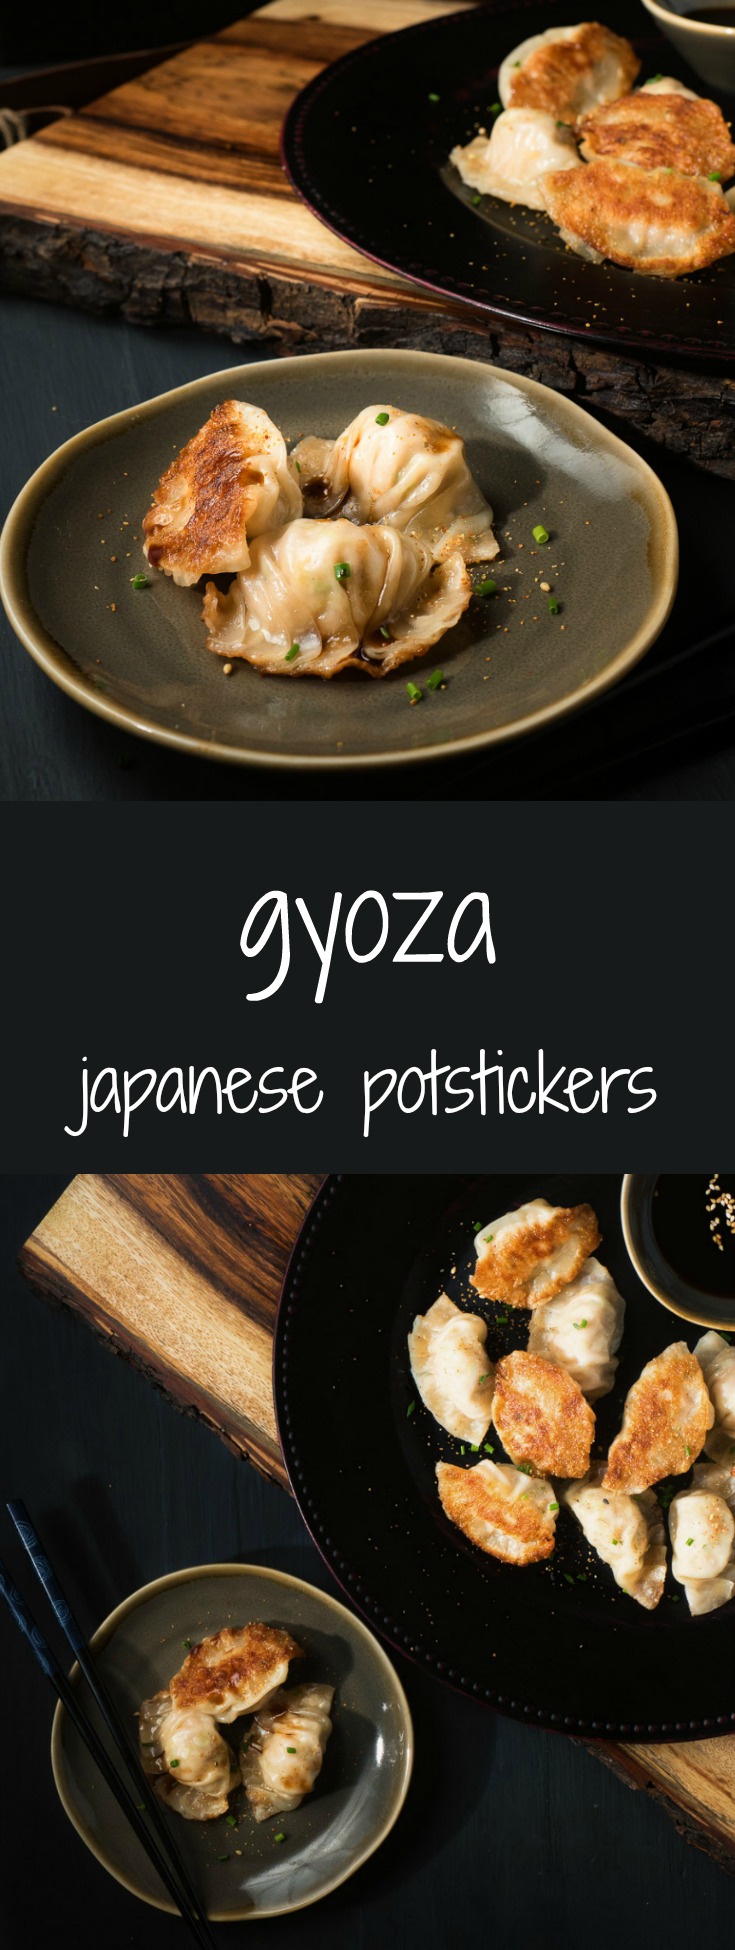 Japanese gyoza or potstickers are a great start to any meal.